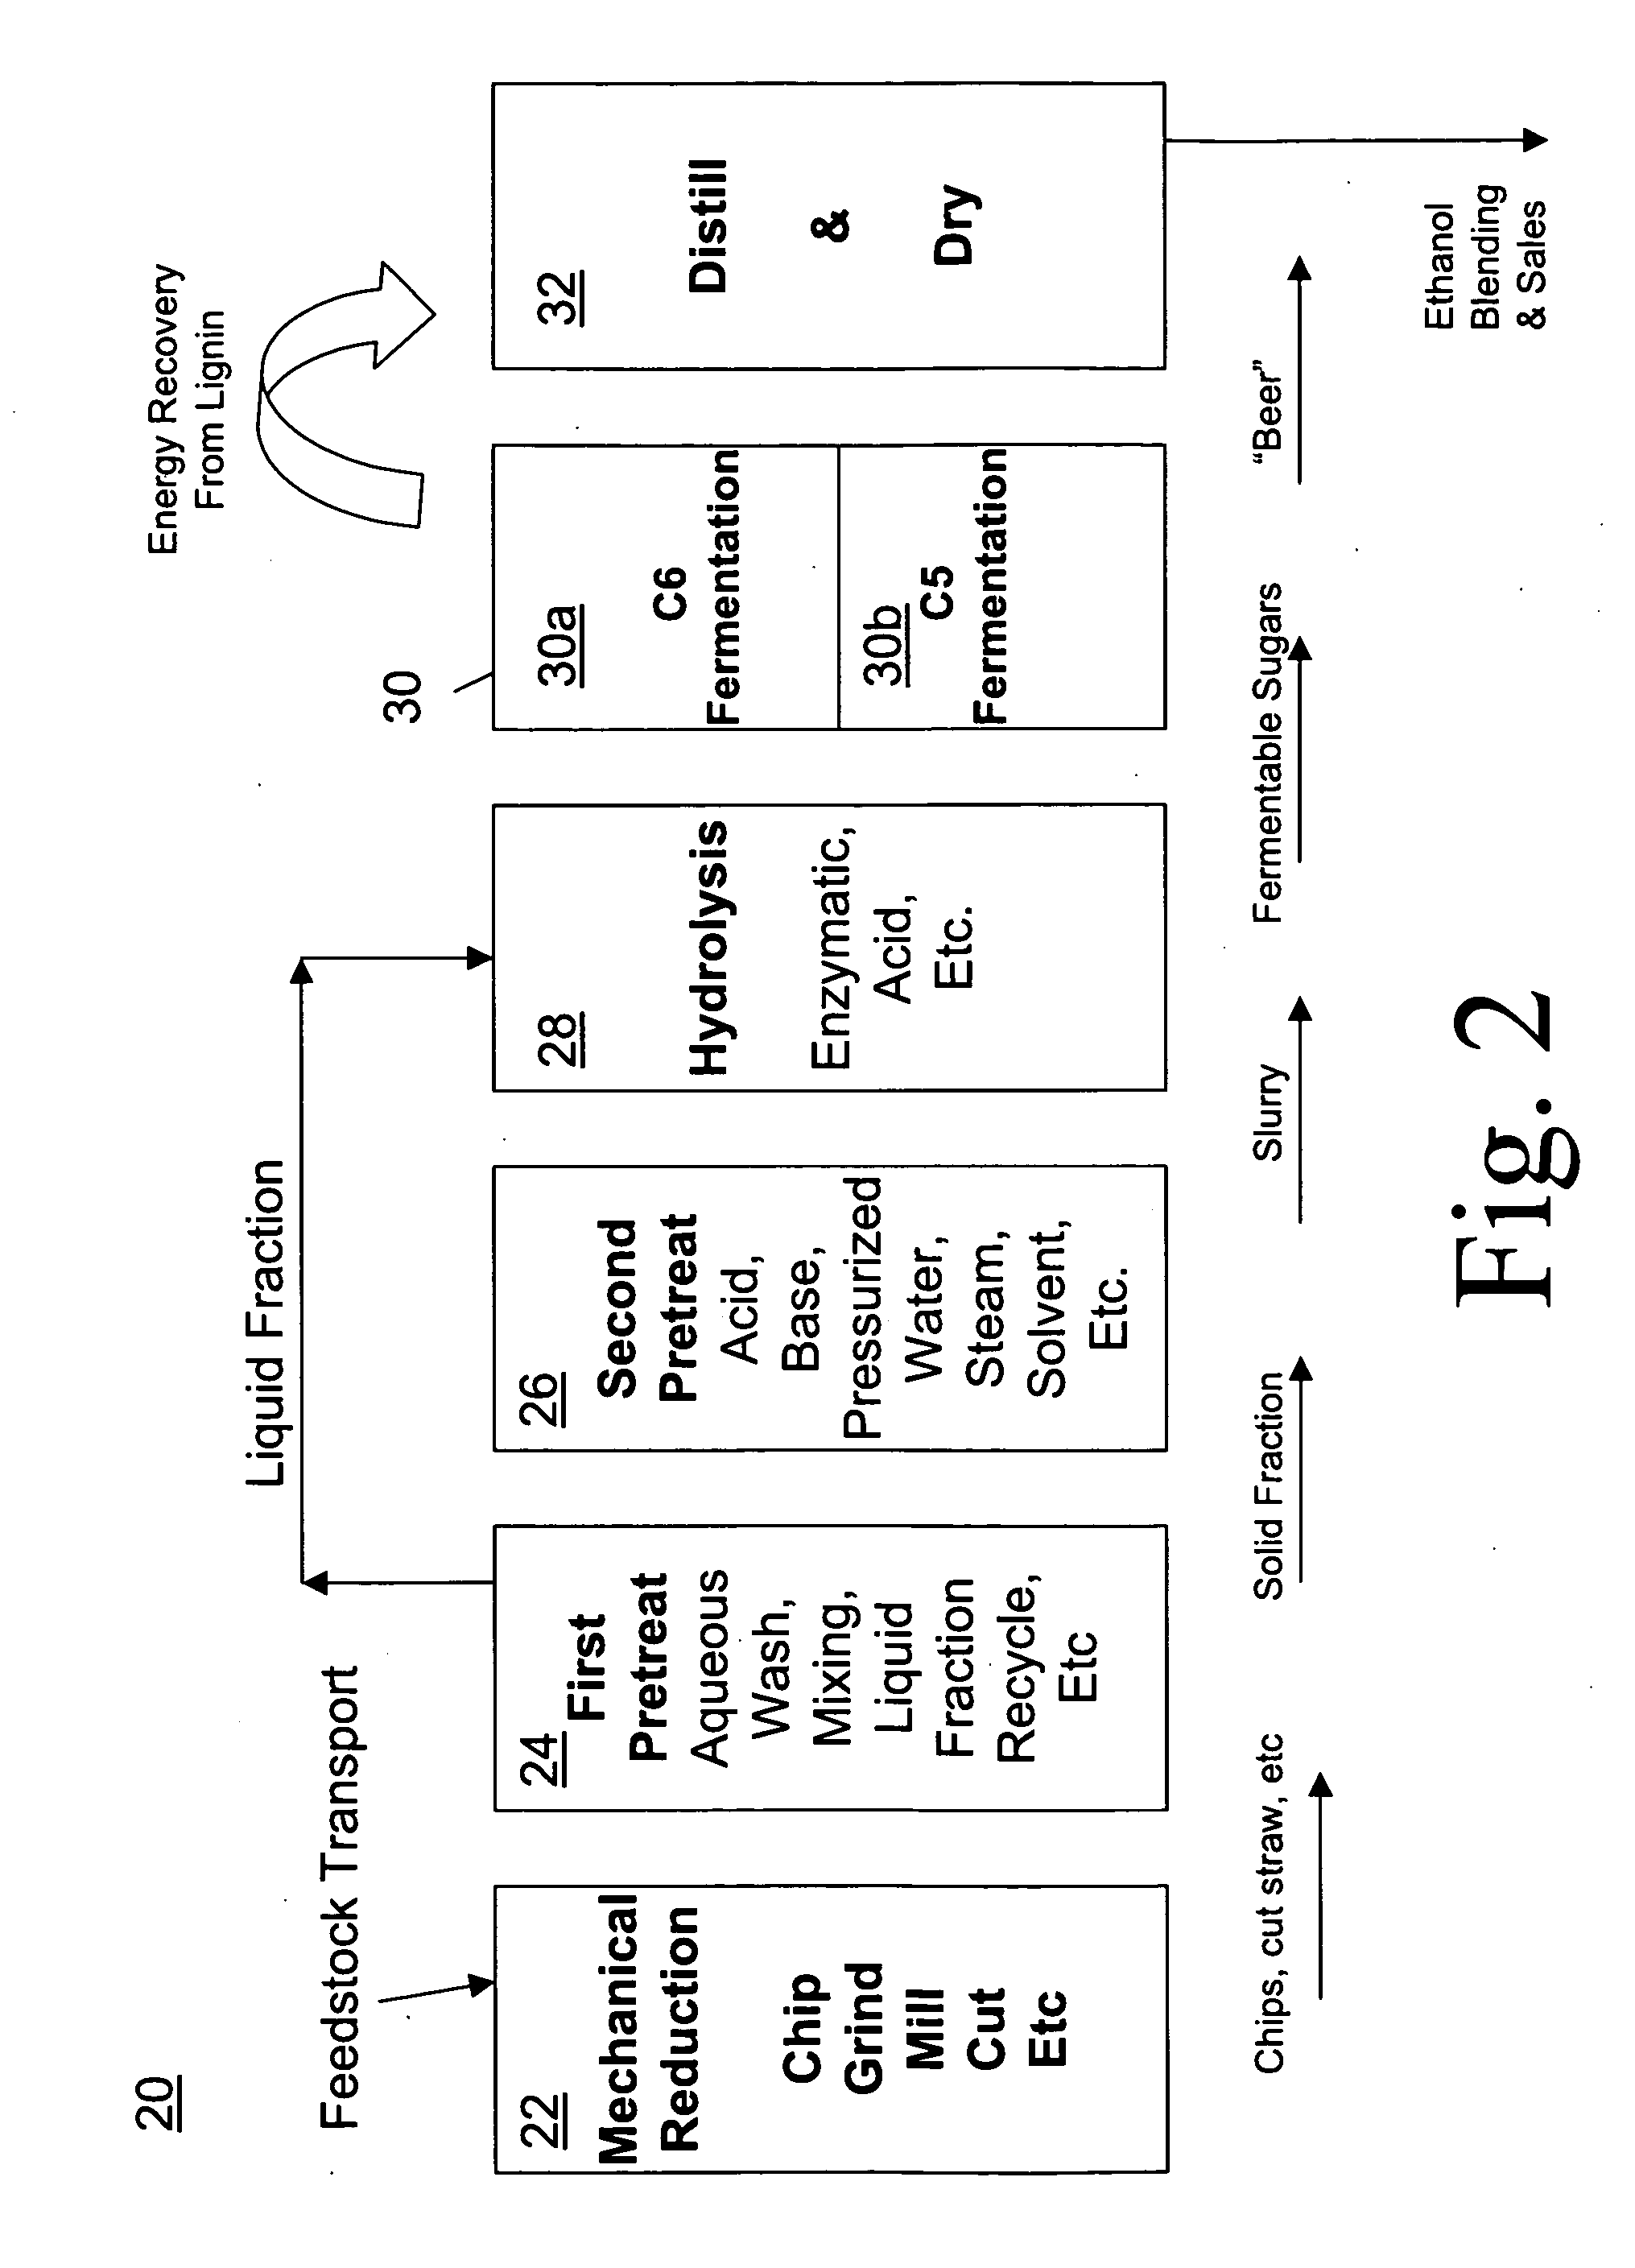 Treatment Systems and Processes for Lignocellulosic Substrates that Contain Soluble Carbohydrates